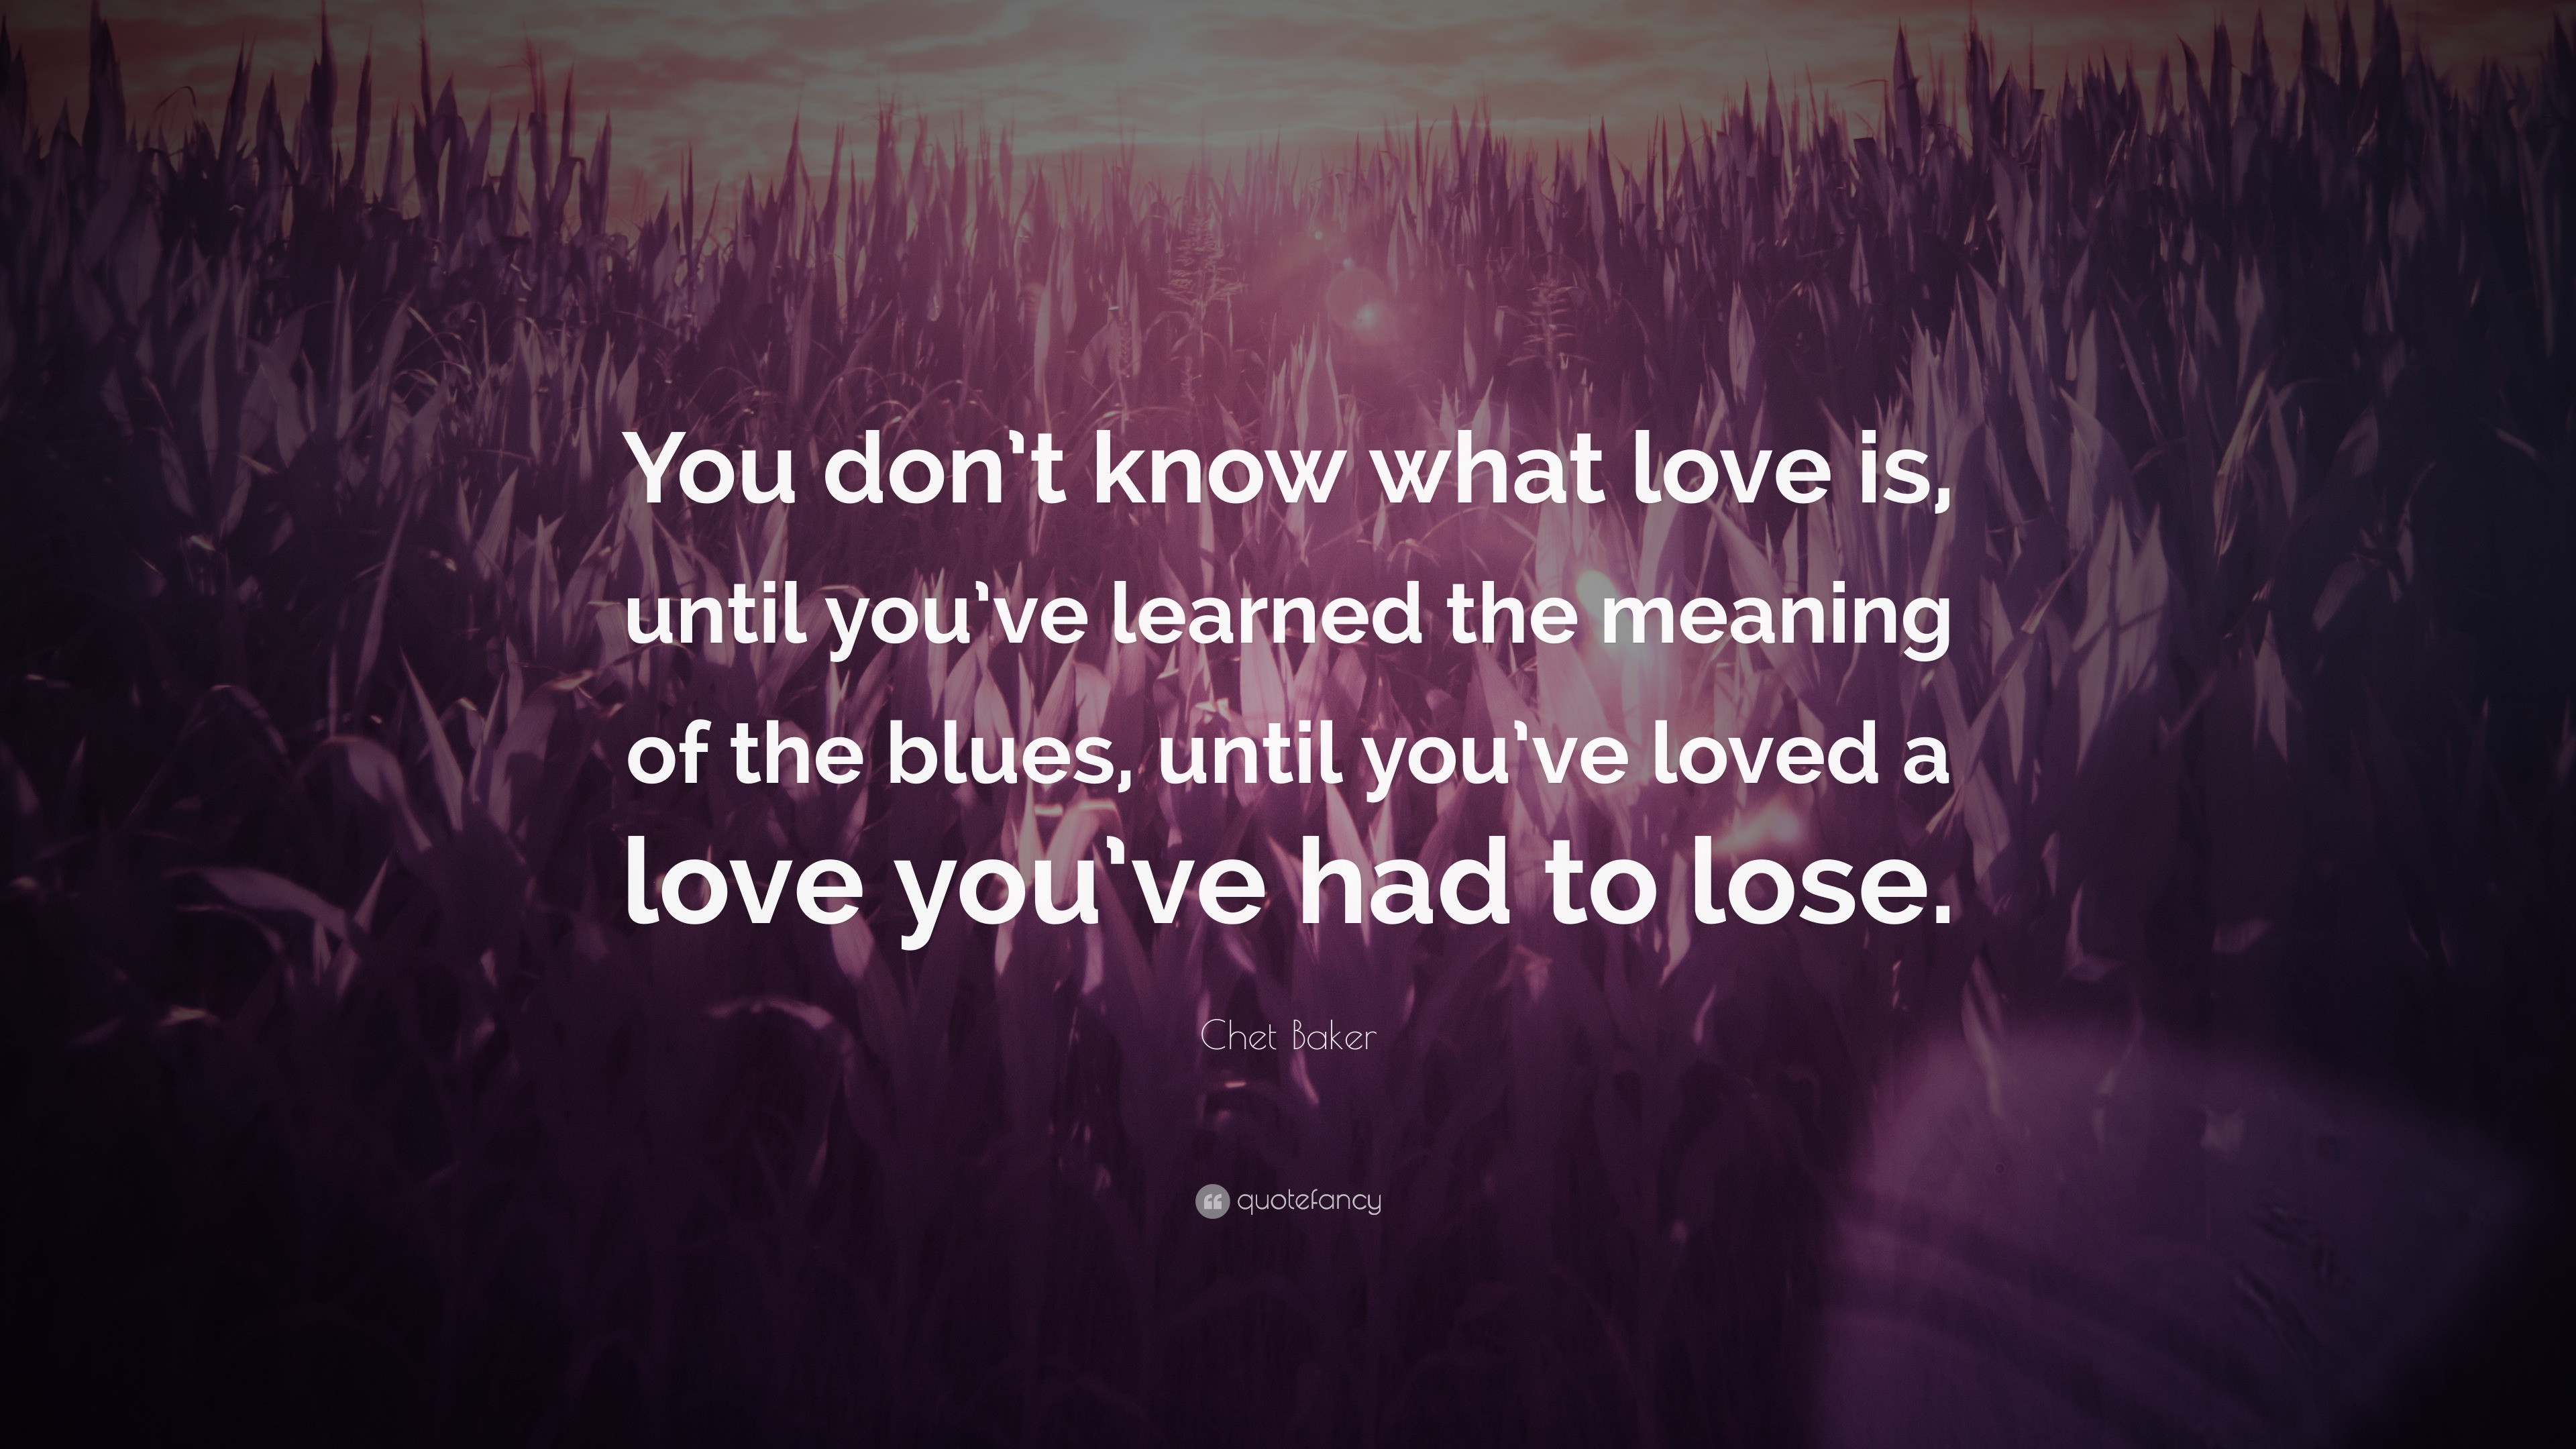 Chet Baker Quote You Don T Know What Love Is Until You Ve Learned The Meaning Of The Blues Until You Ve Loved A Love You Ve Had To Lose